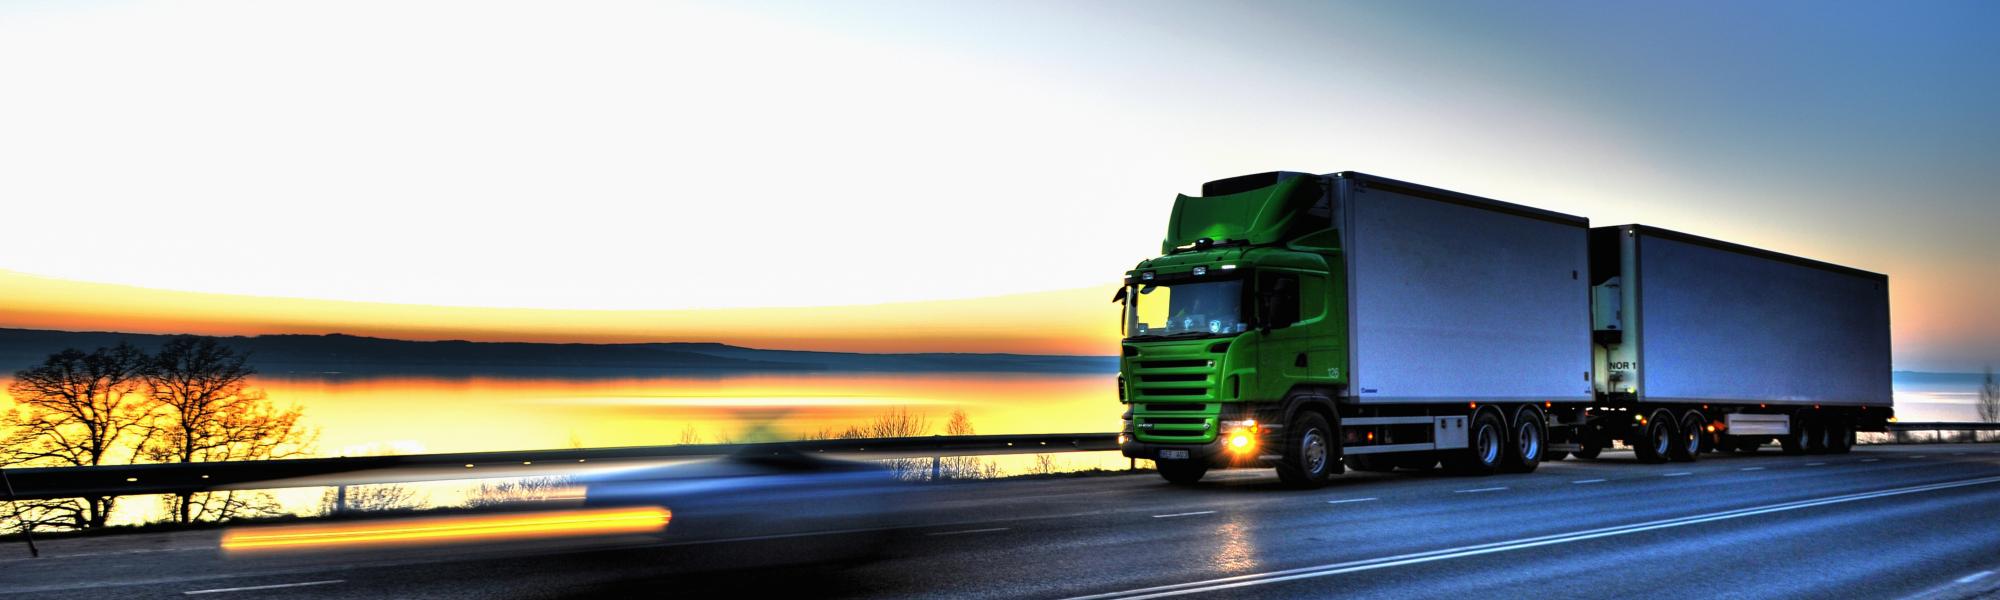 Webinar - Road to recovery: European road transport beyond COVID19